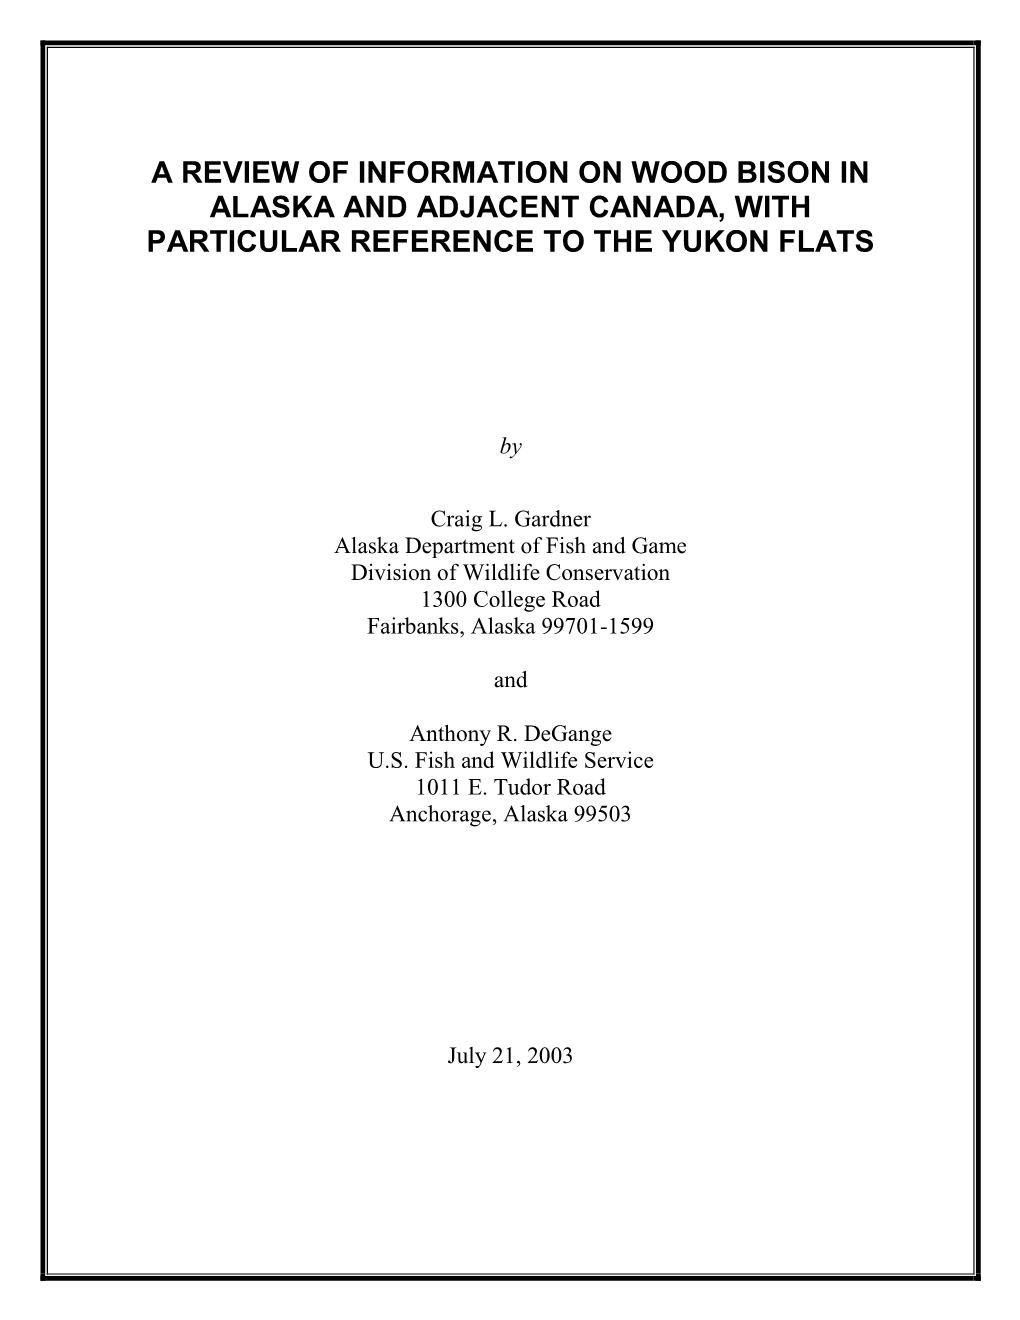 A Review of Information on Wood Bison in Alaska and Adjacent Canada, with Particular Reference to the Yukon Flats